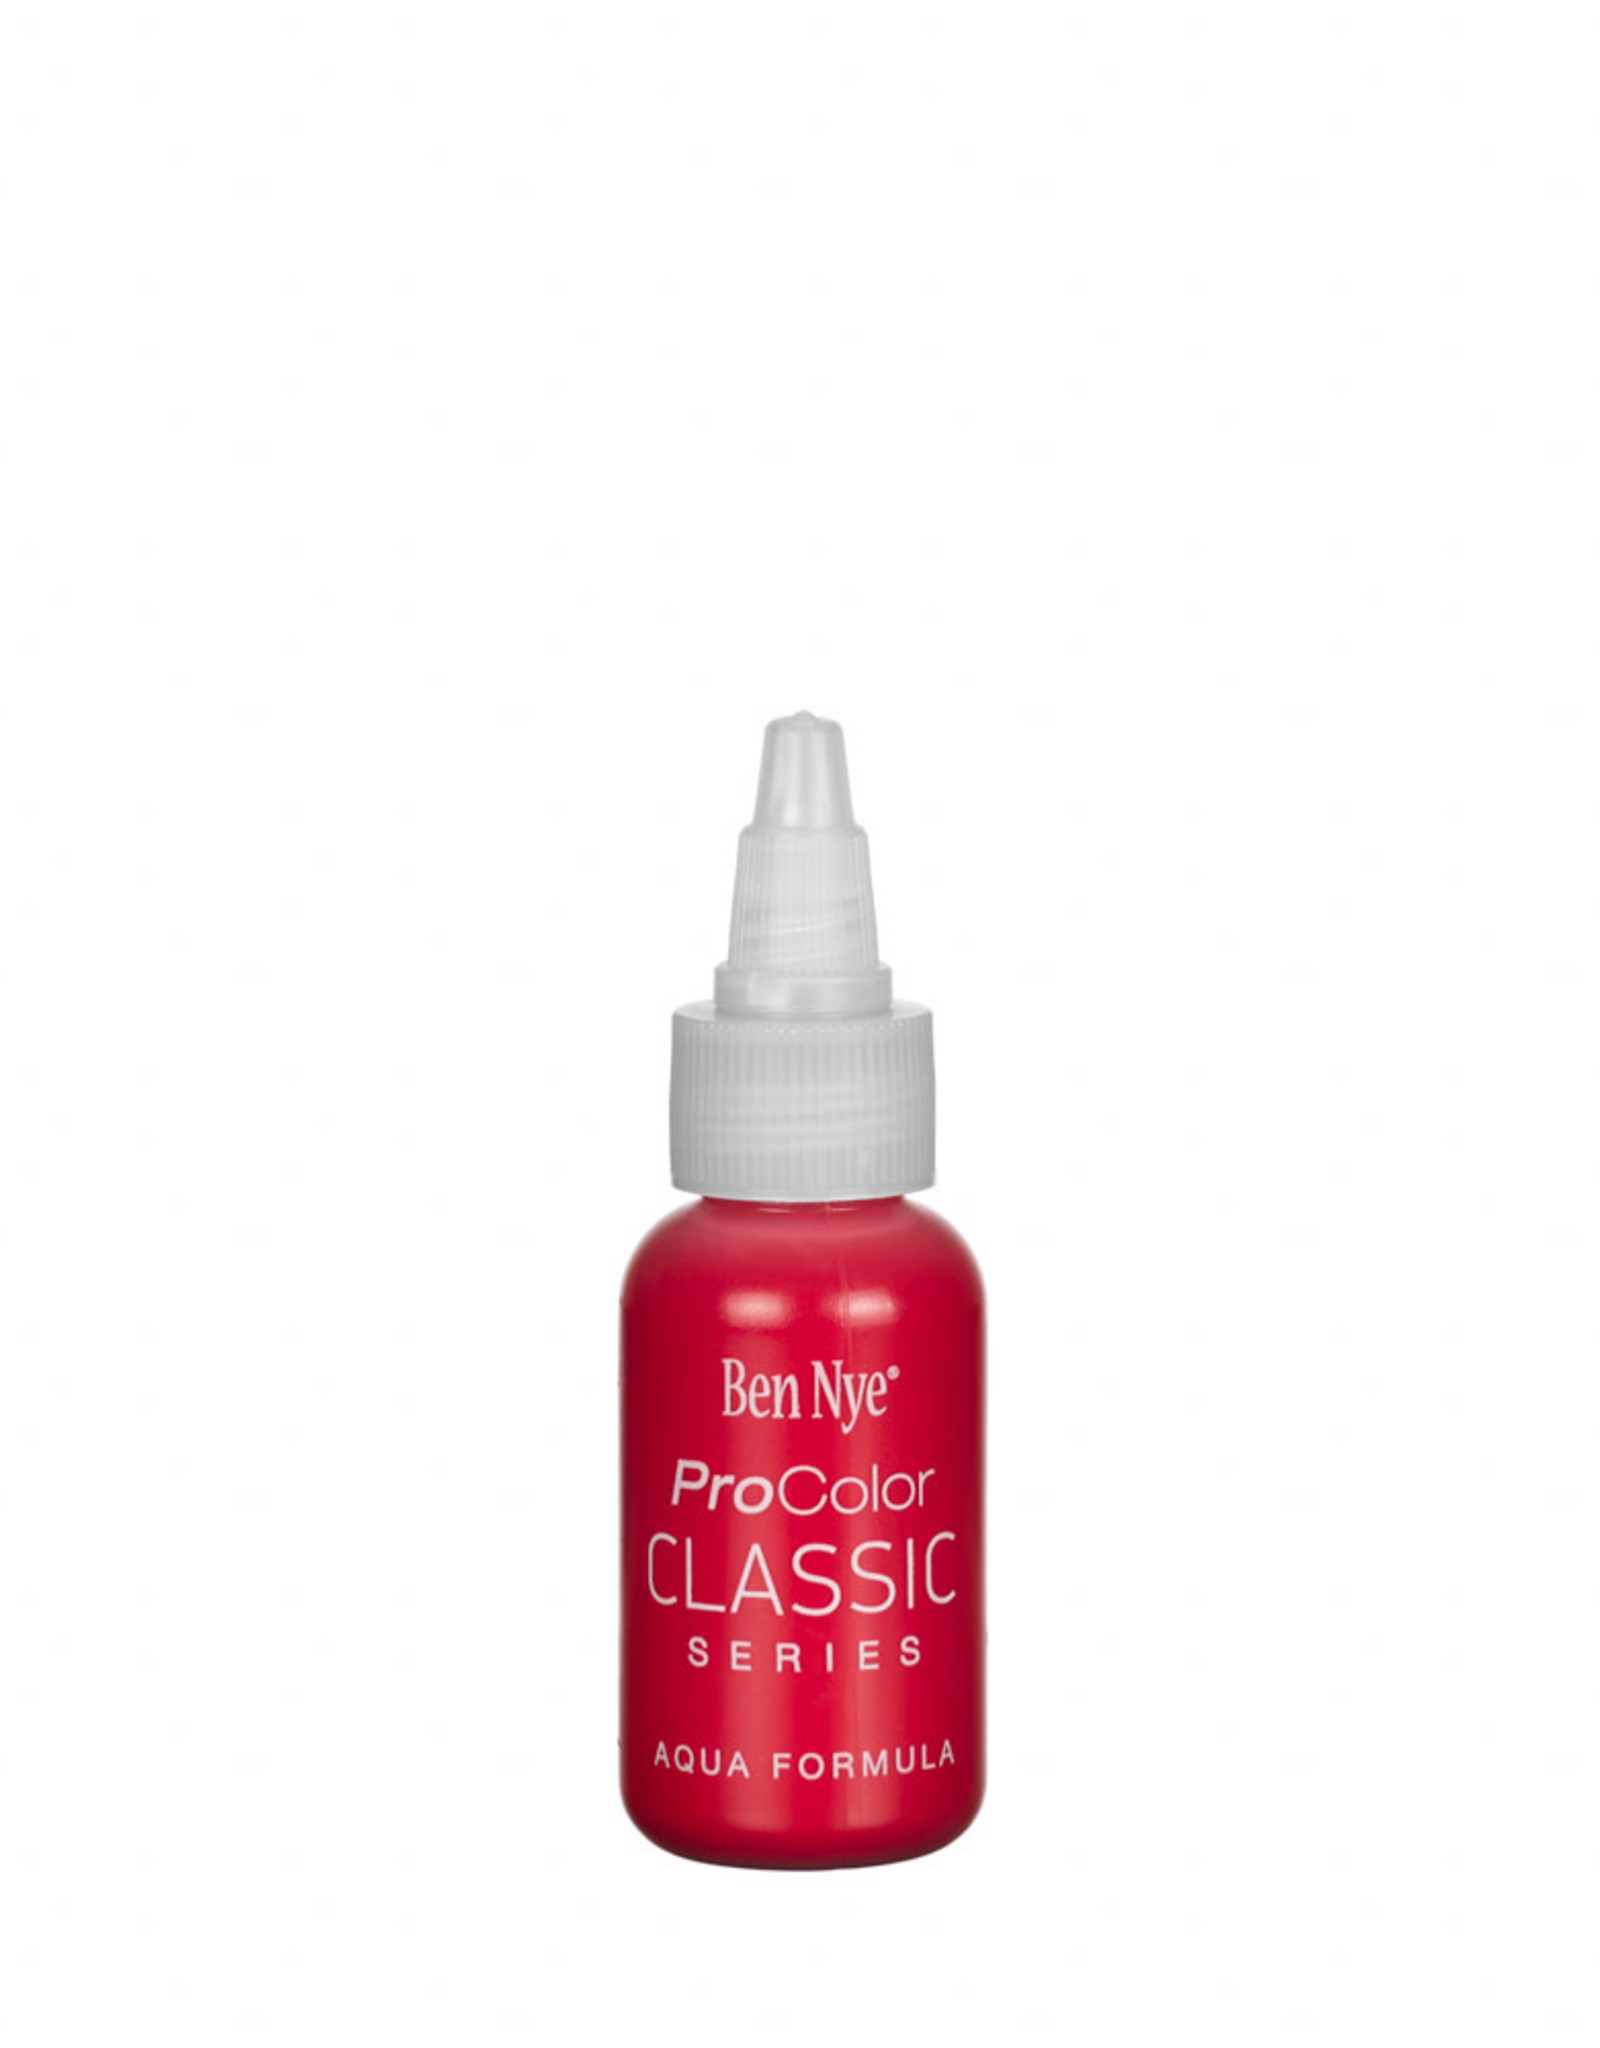 Ben Nye PROCOLOR AIRBRUSH PAINT-CLASSIC, RED, 1 OZ